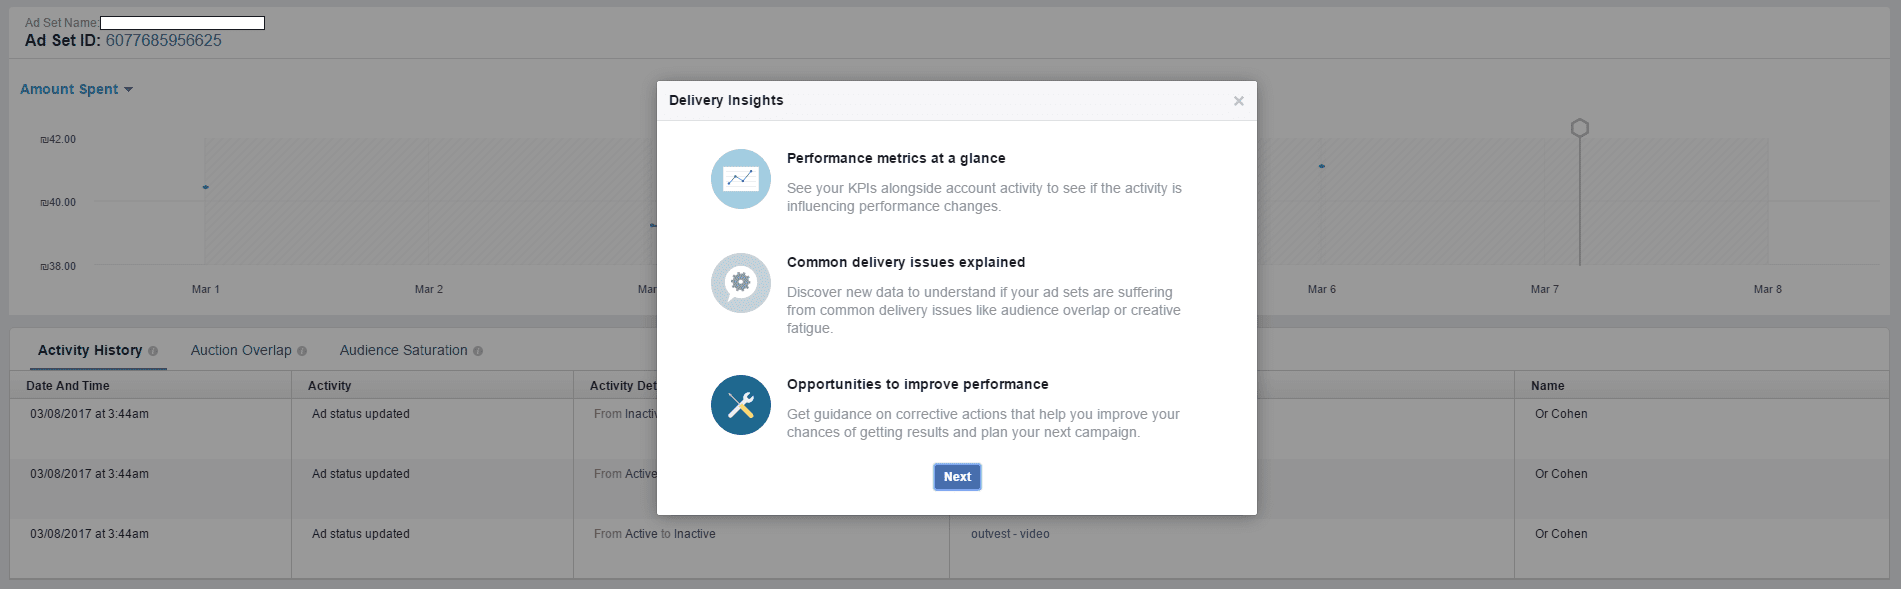 facebook delivery insights welcome message